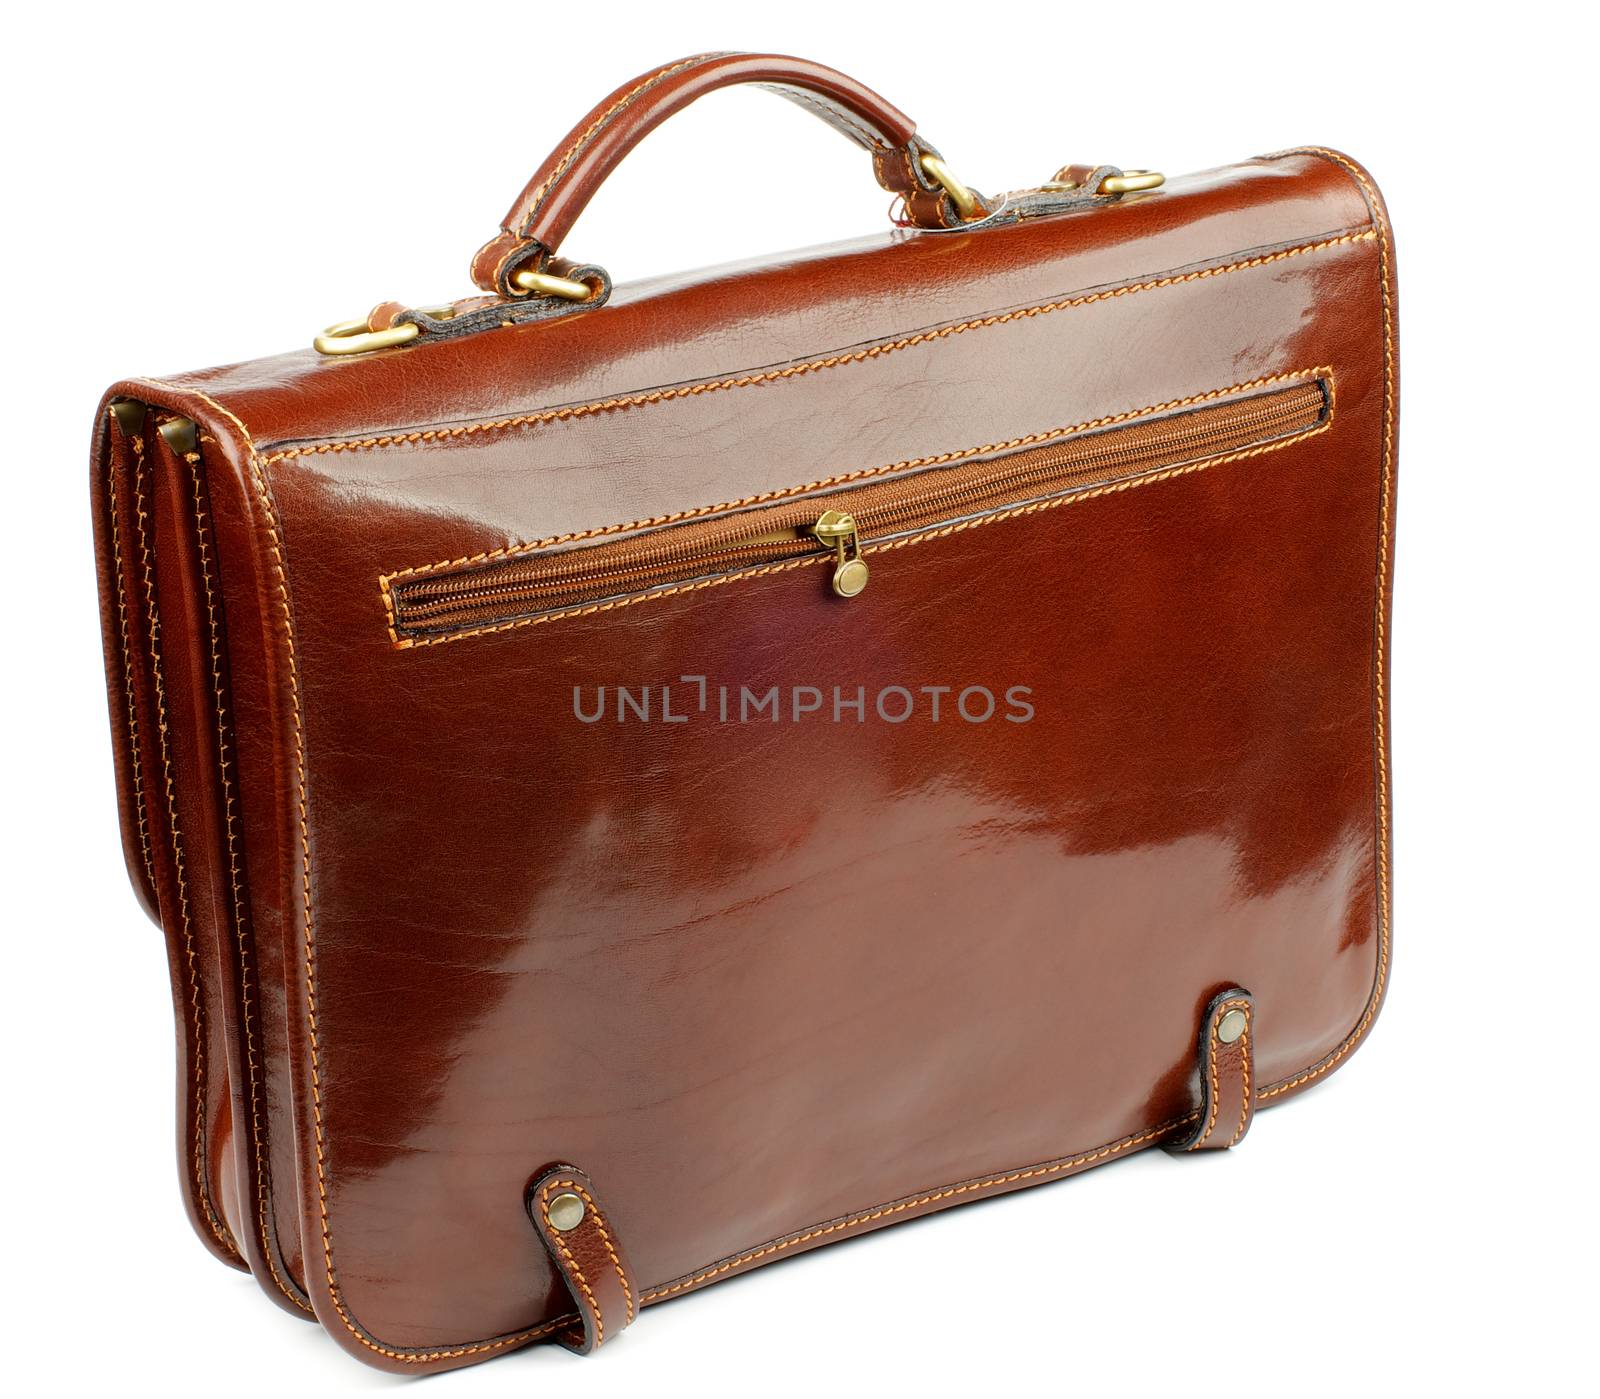 Ginger Shiny Leather Old Fashioned Briefcase with Gold Details and Zipper Pocket isolated on white background